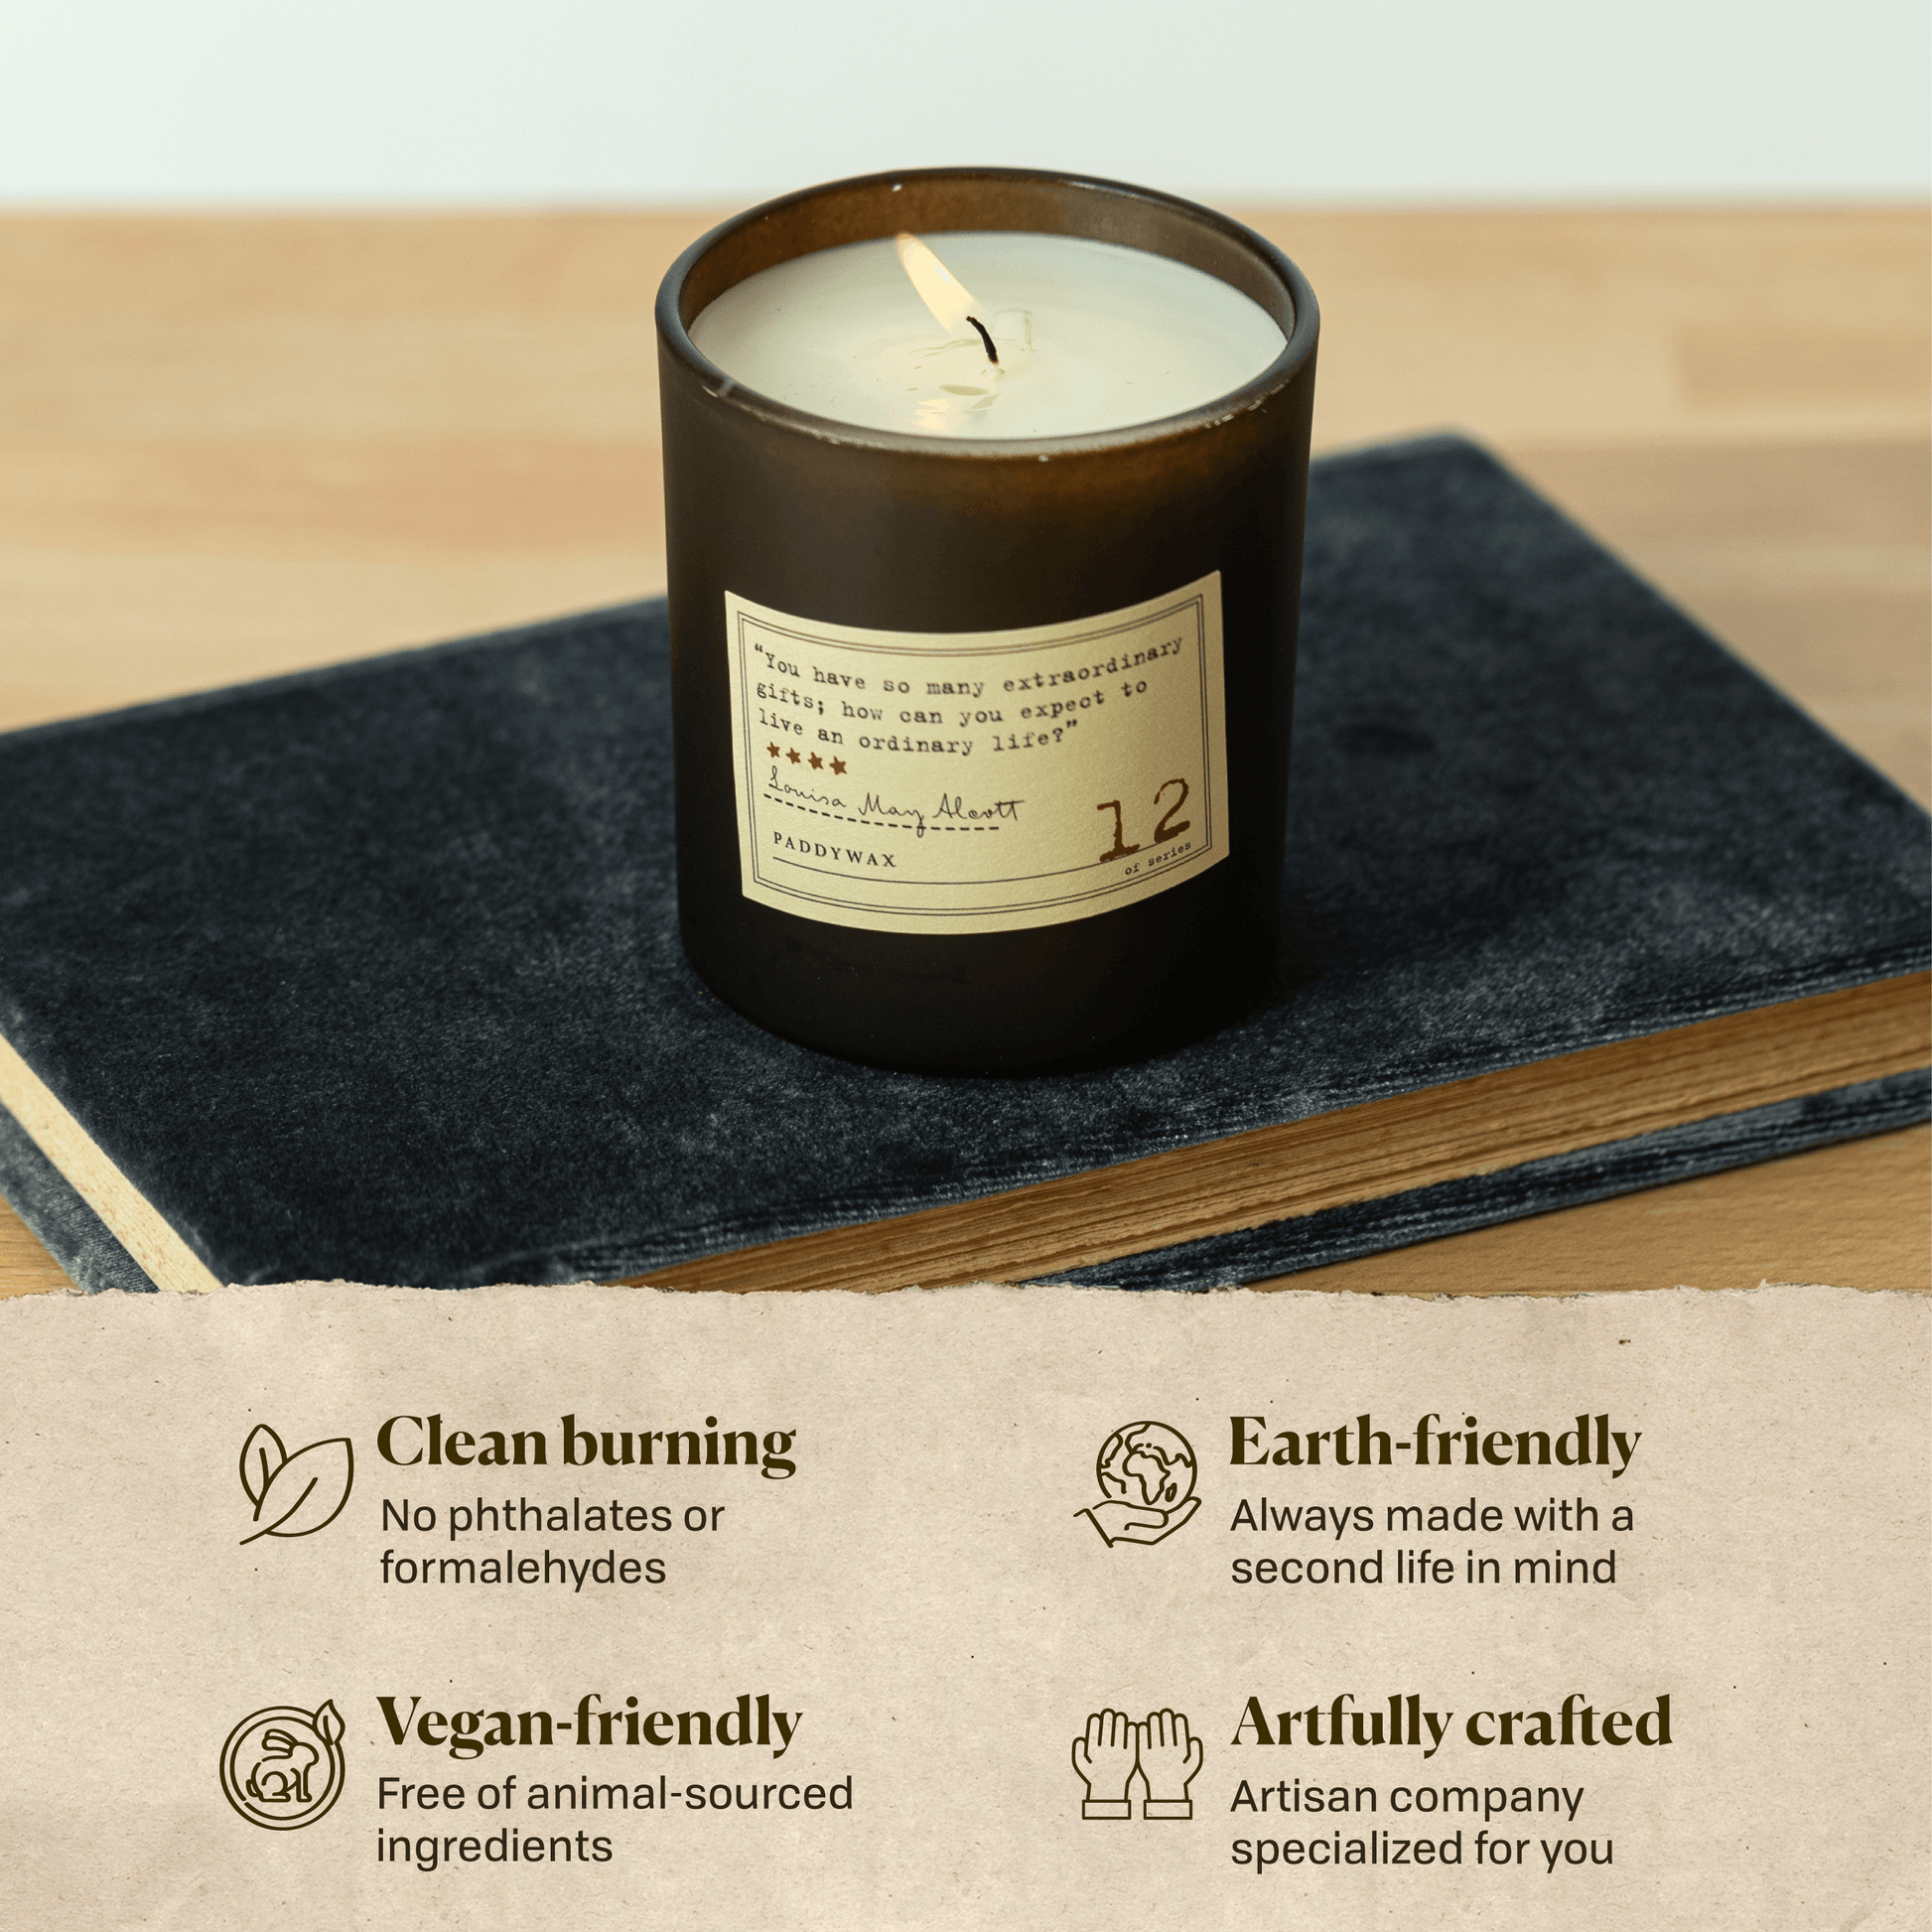 A photo of the Louisa May Alcott candle sitting on a book. Clean burning: no phthalates or formaldehydes. Earth-friendly: Always made with a second life in mind. Vegan-friendly: Free of animal sourced ingredients. Artfully crafted: Artisan company specialized for you.